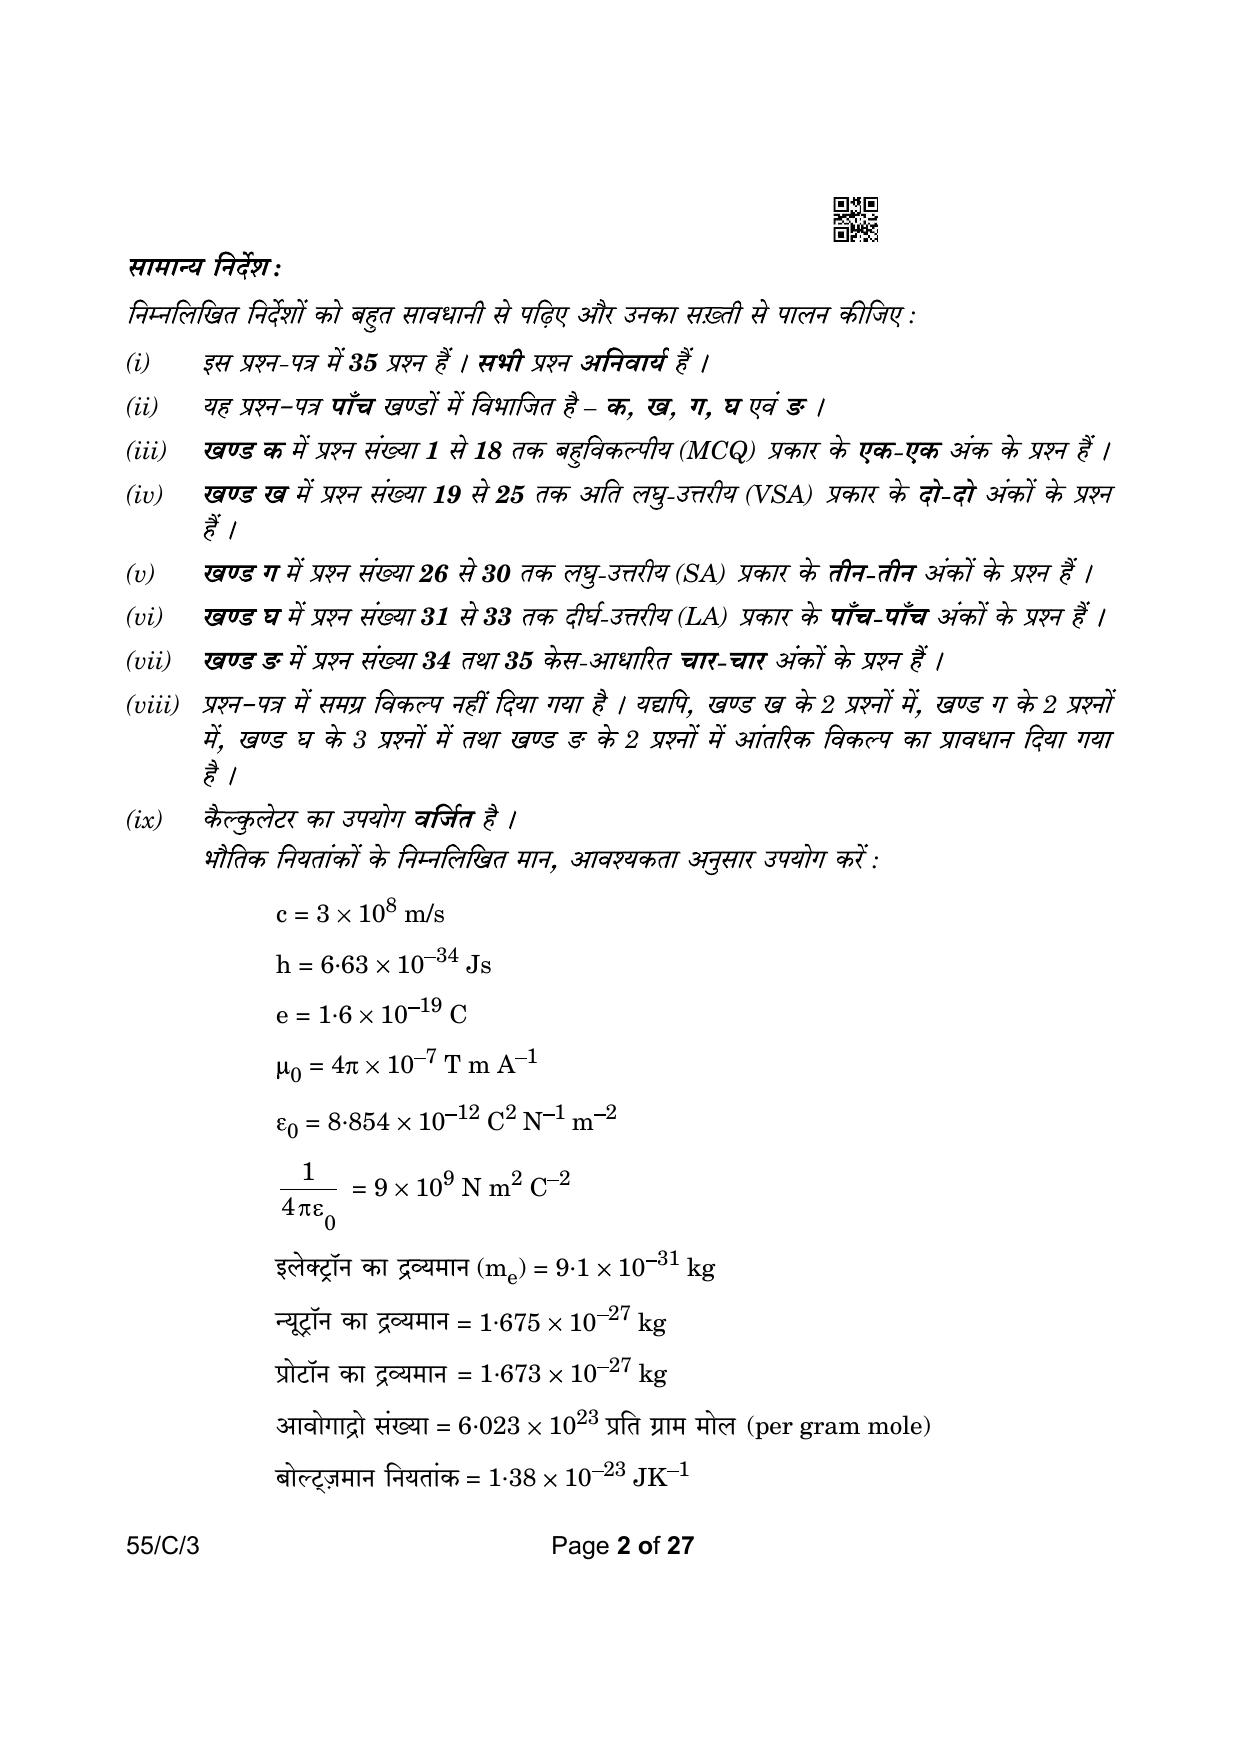 CBSE Class 12 55-3 Physics 2023 (Compartment) Question Paper - Page 2